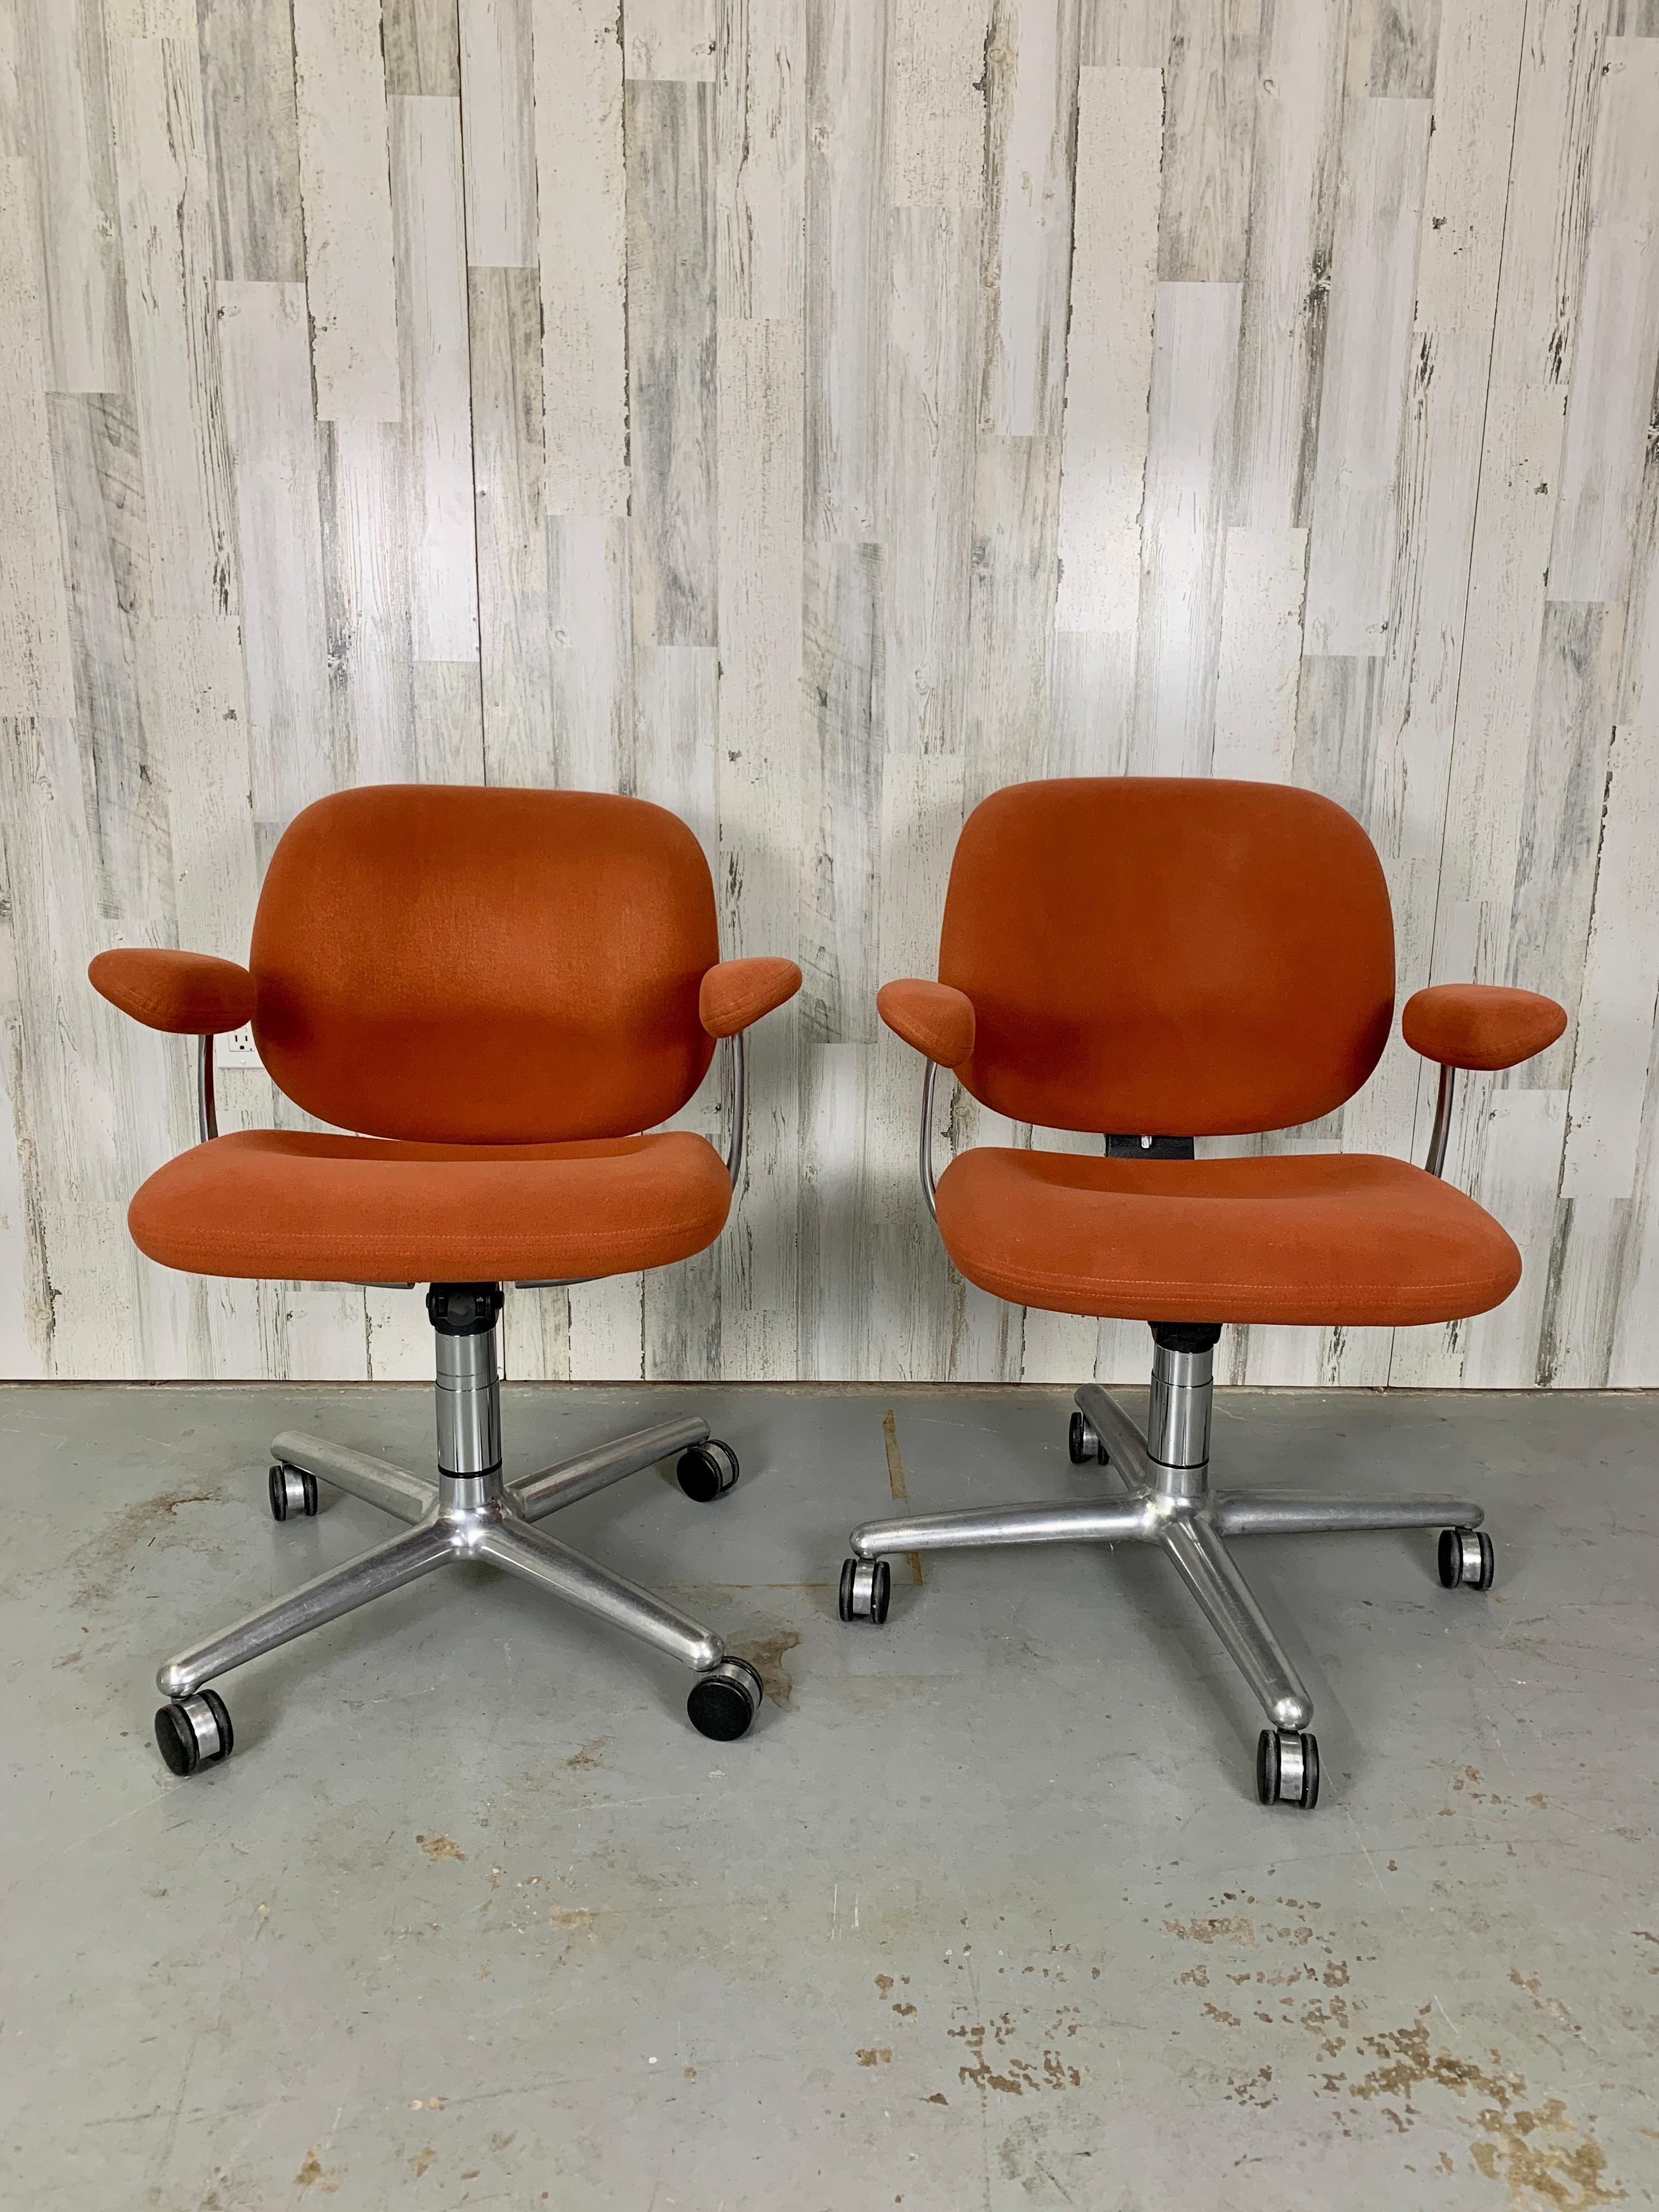 Herman miller swivel aluminum four prong base with Coral colored original fabric.